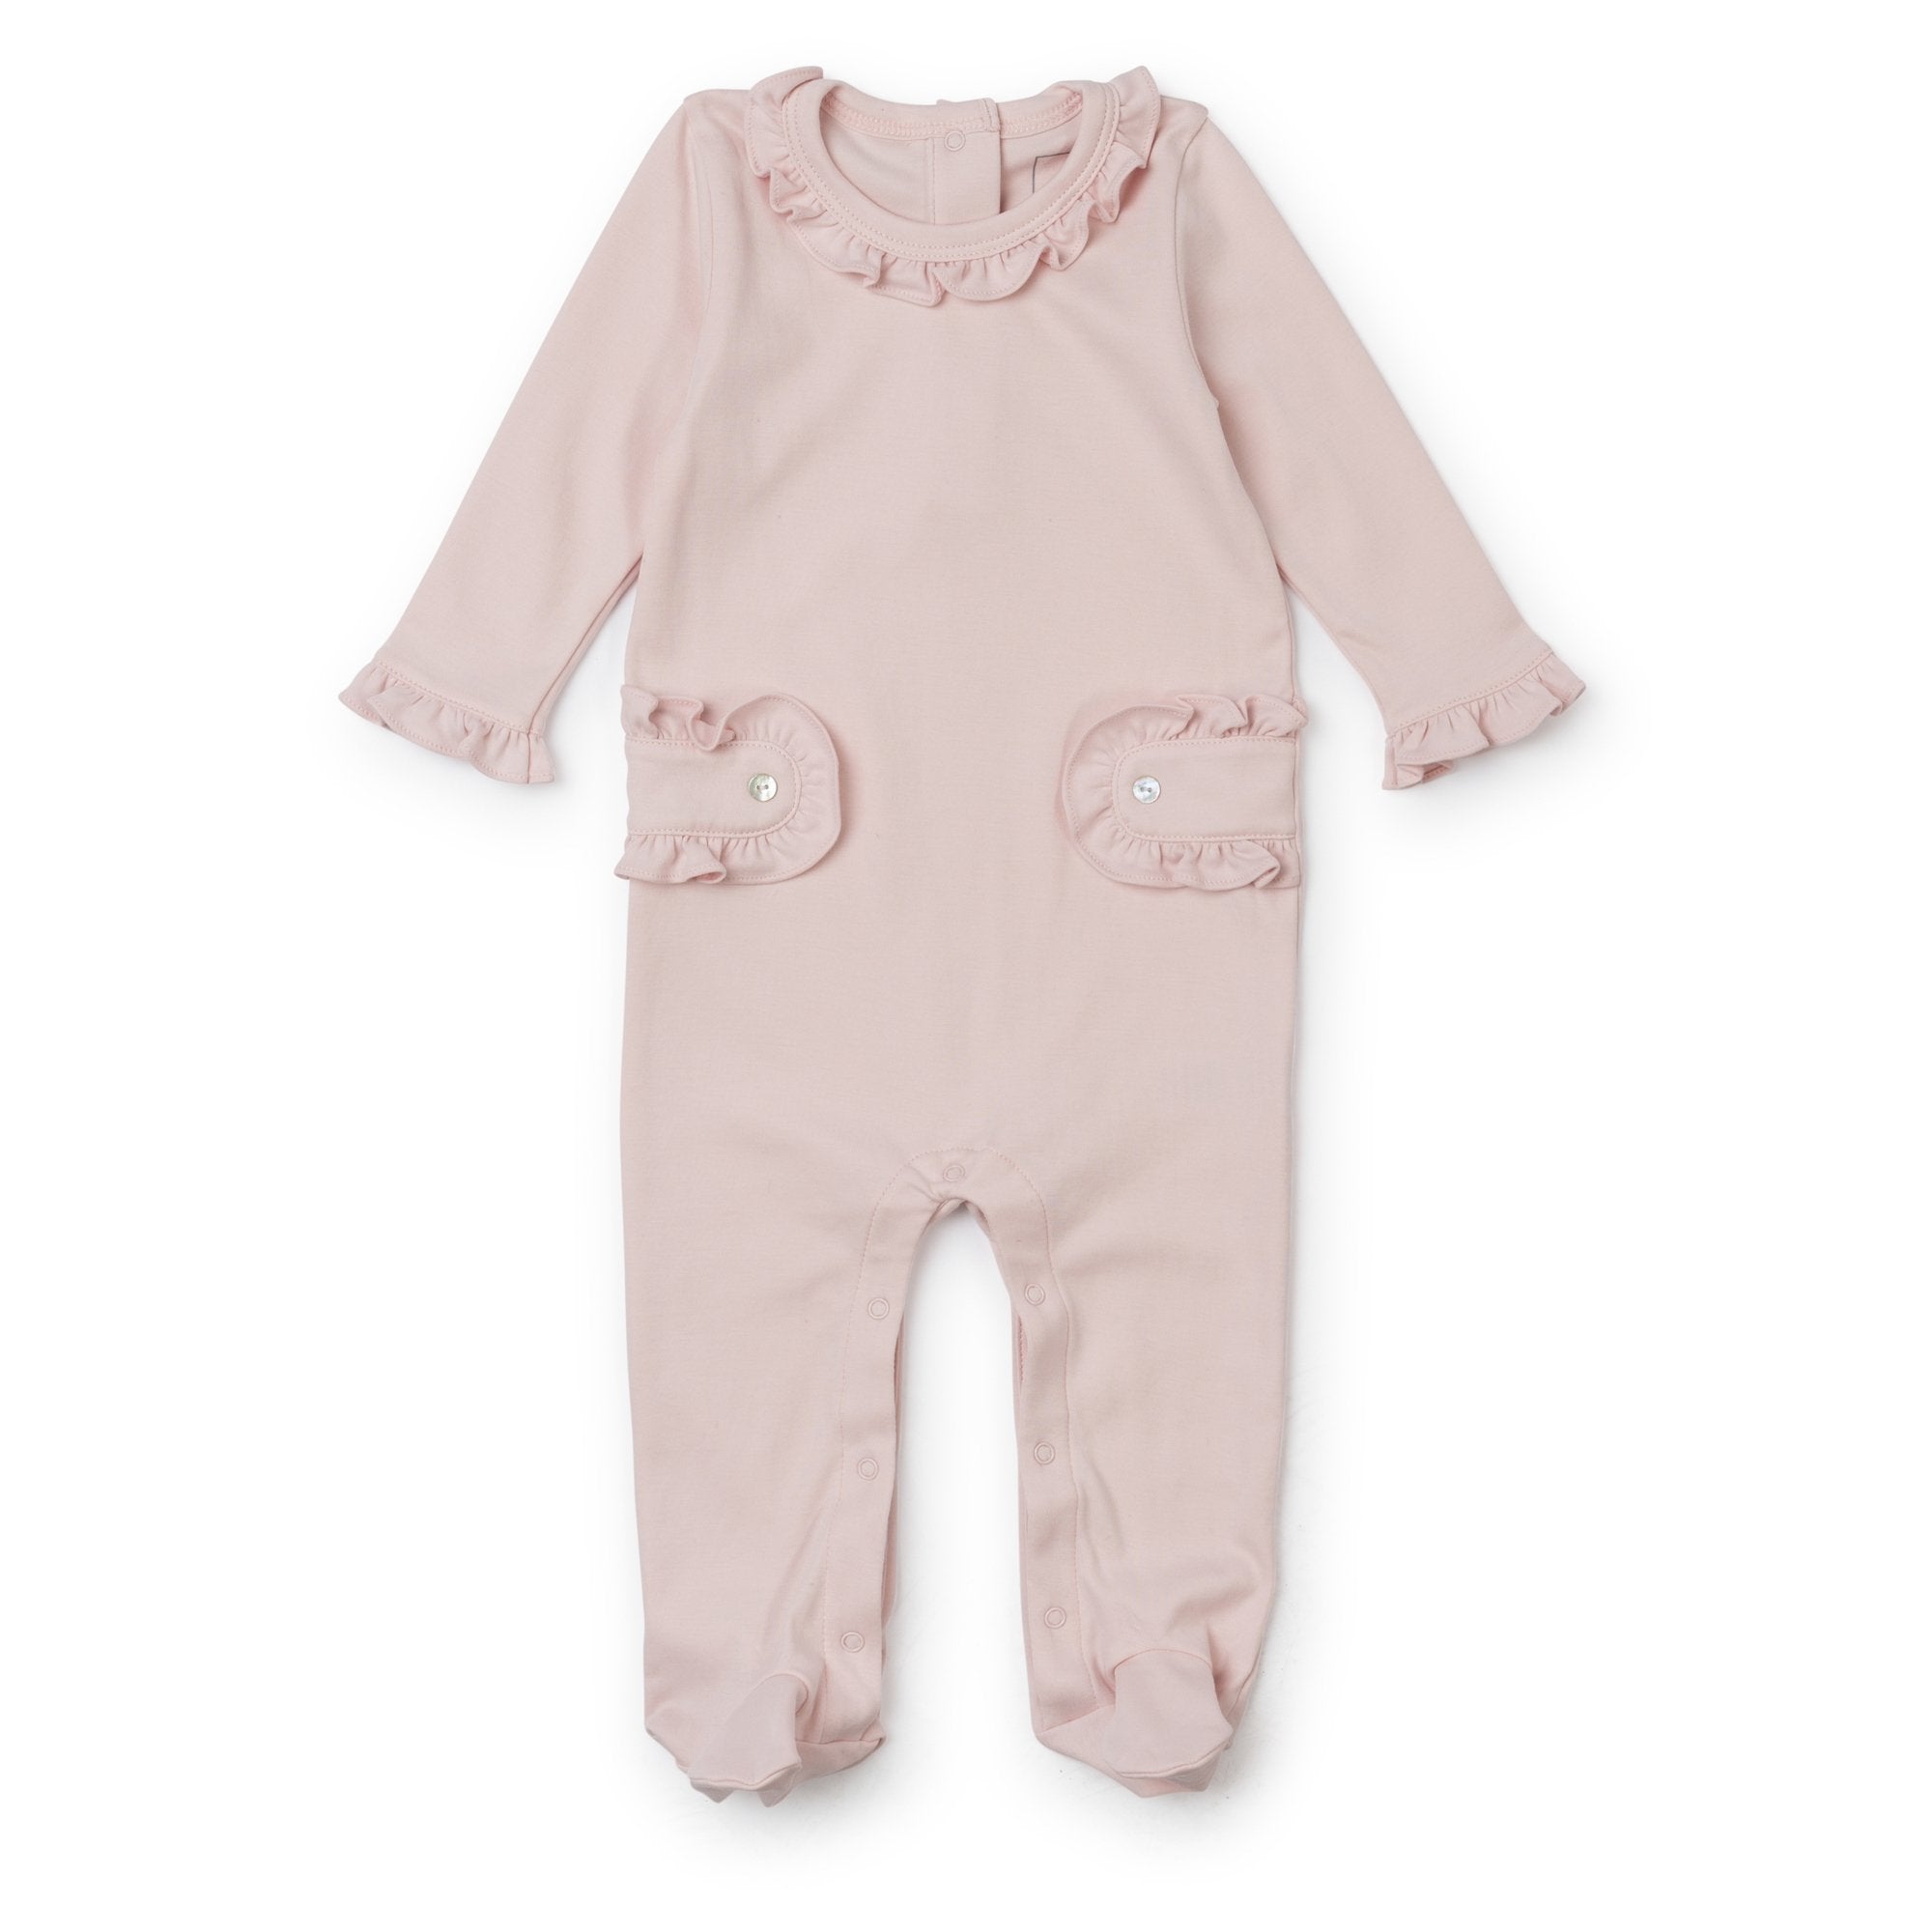 Lucy Pima Cotton Romper For Girls - Light Pink